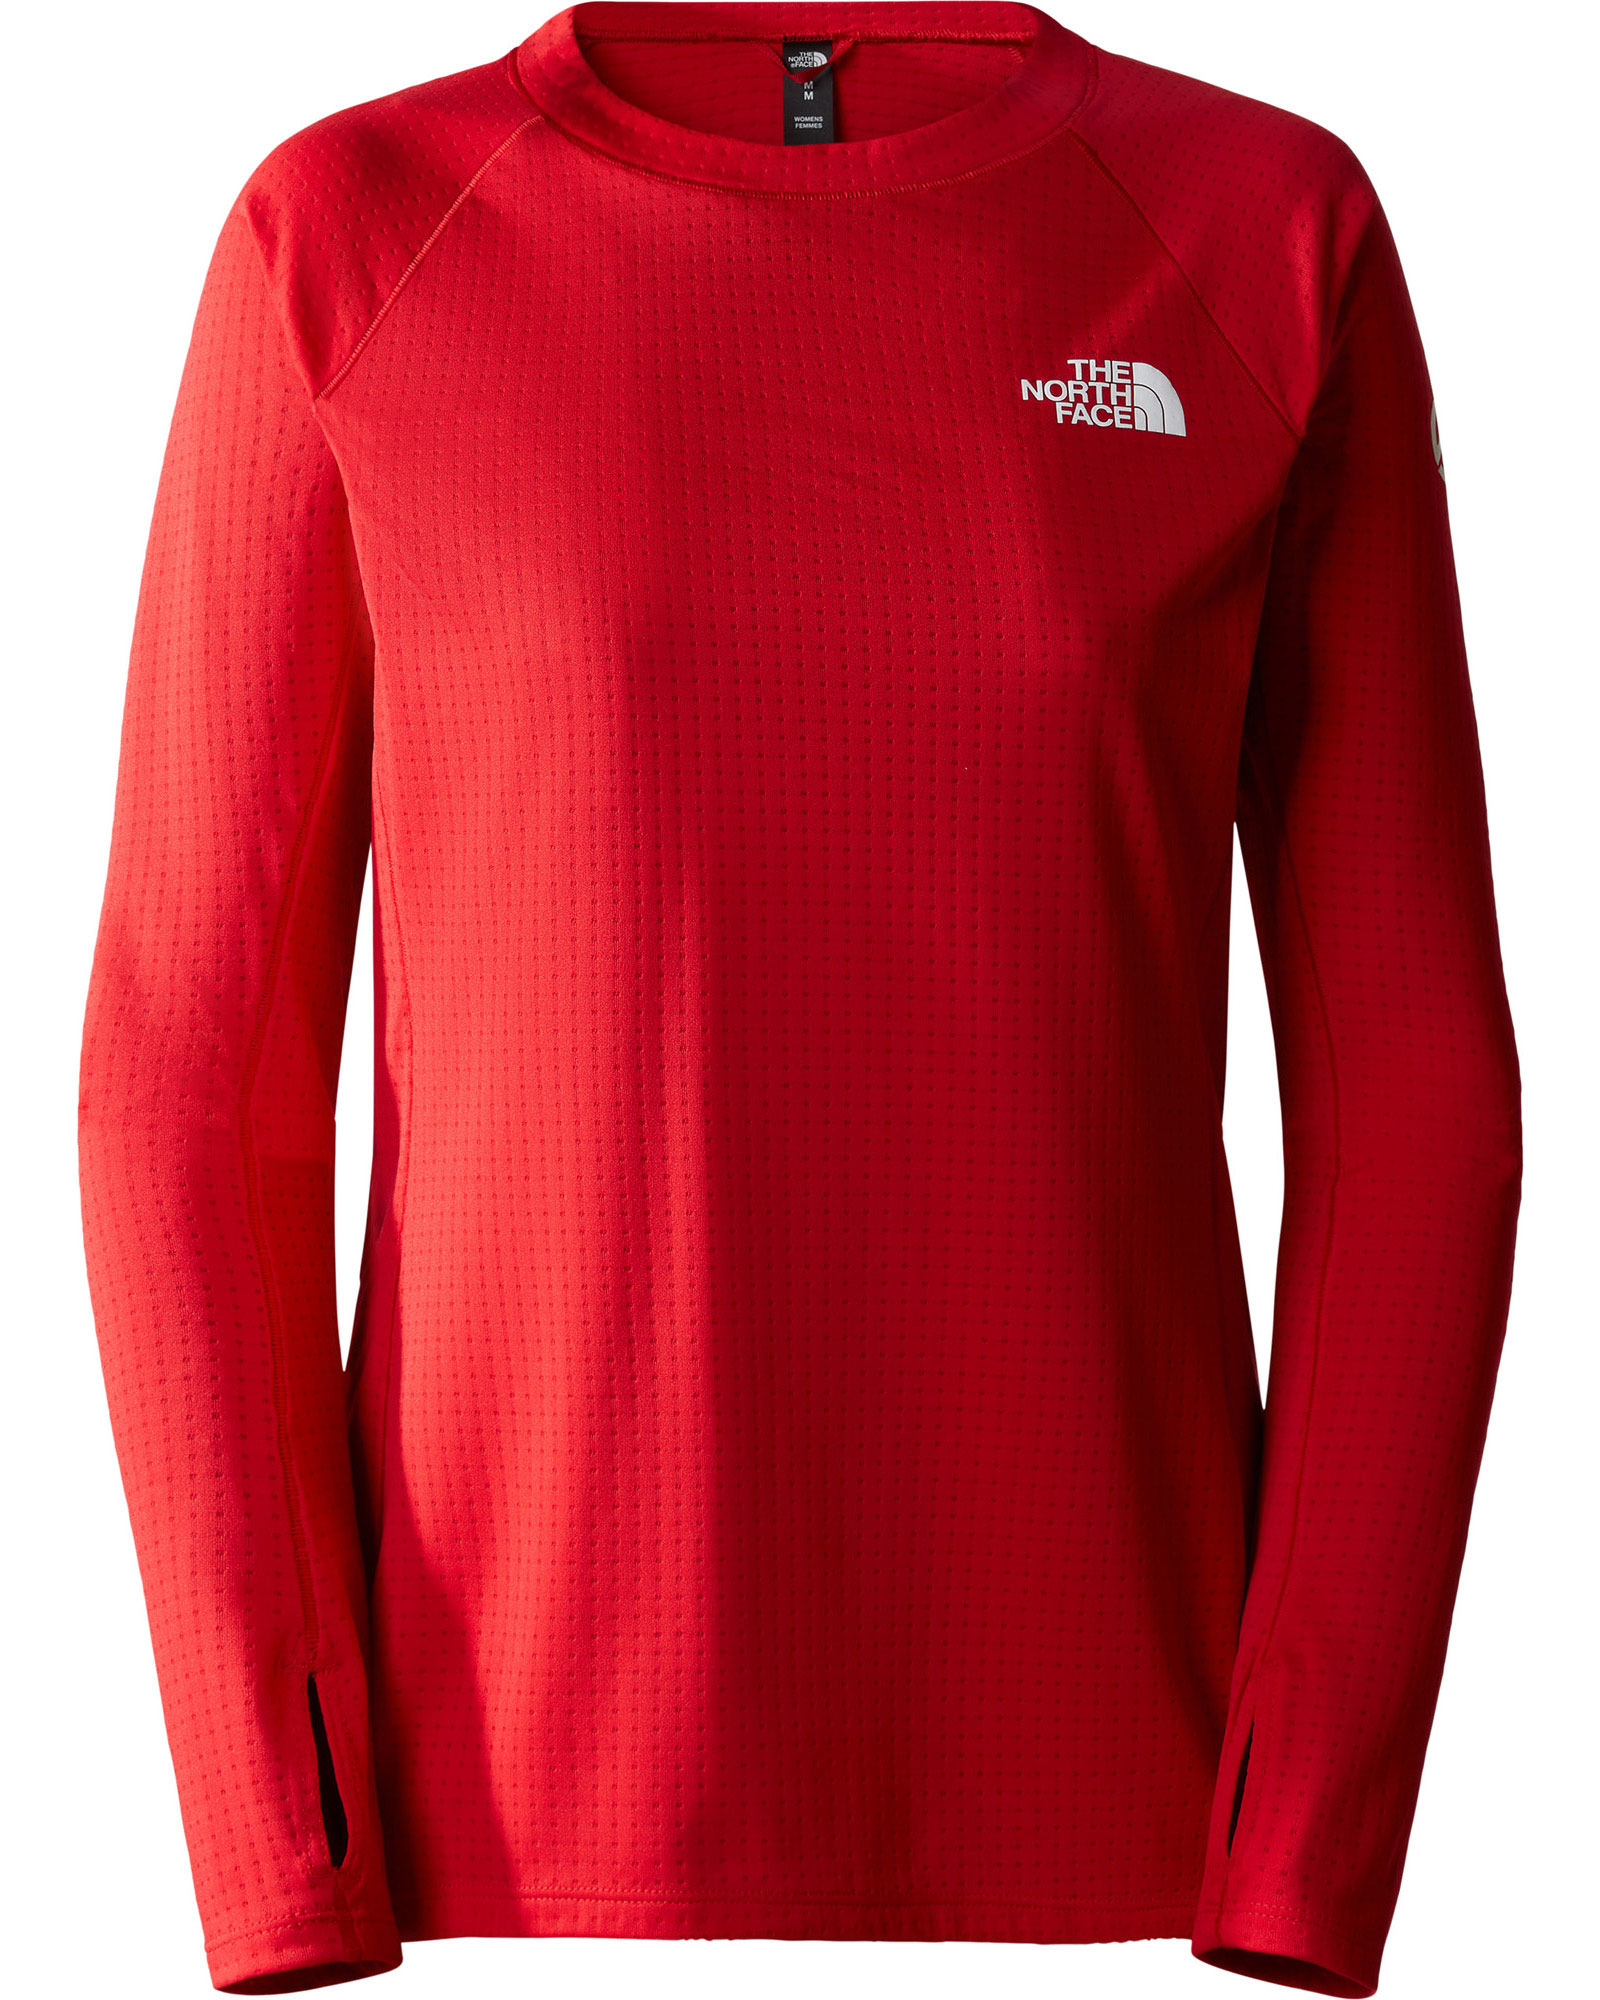 The North Face Summit Pro 120 Women’s Long Sleeve Crew T Shirt - TNF Red S